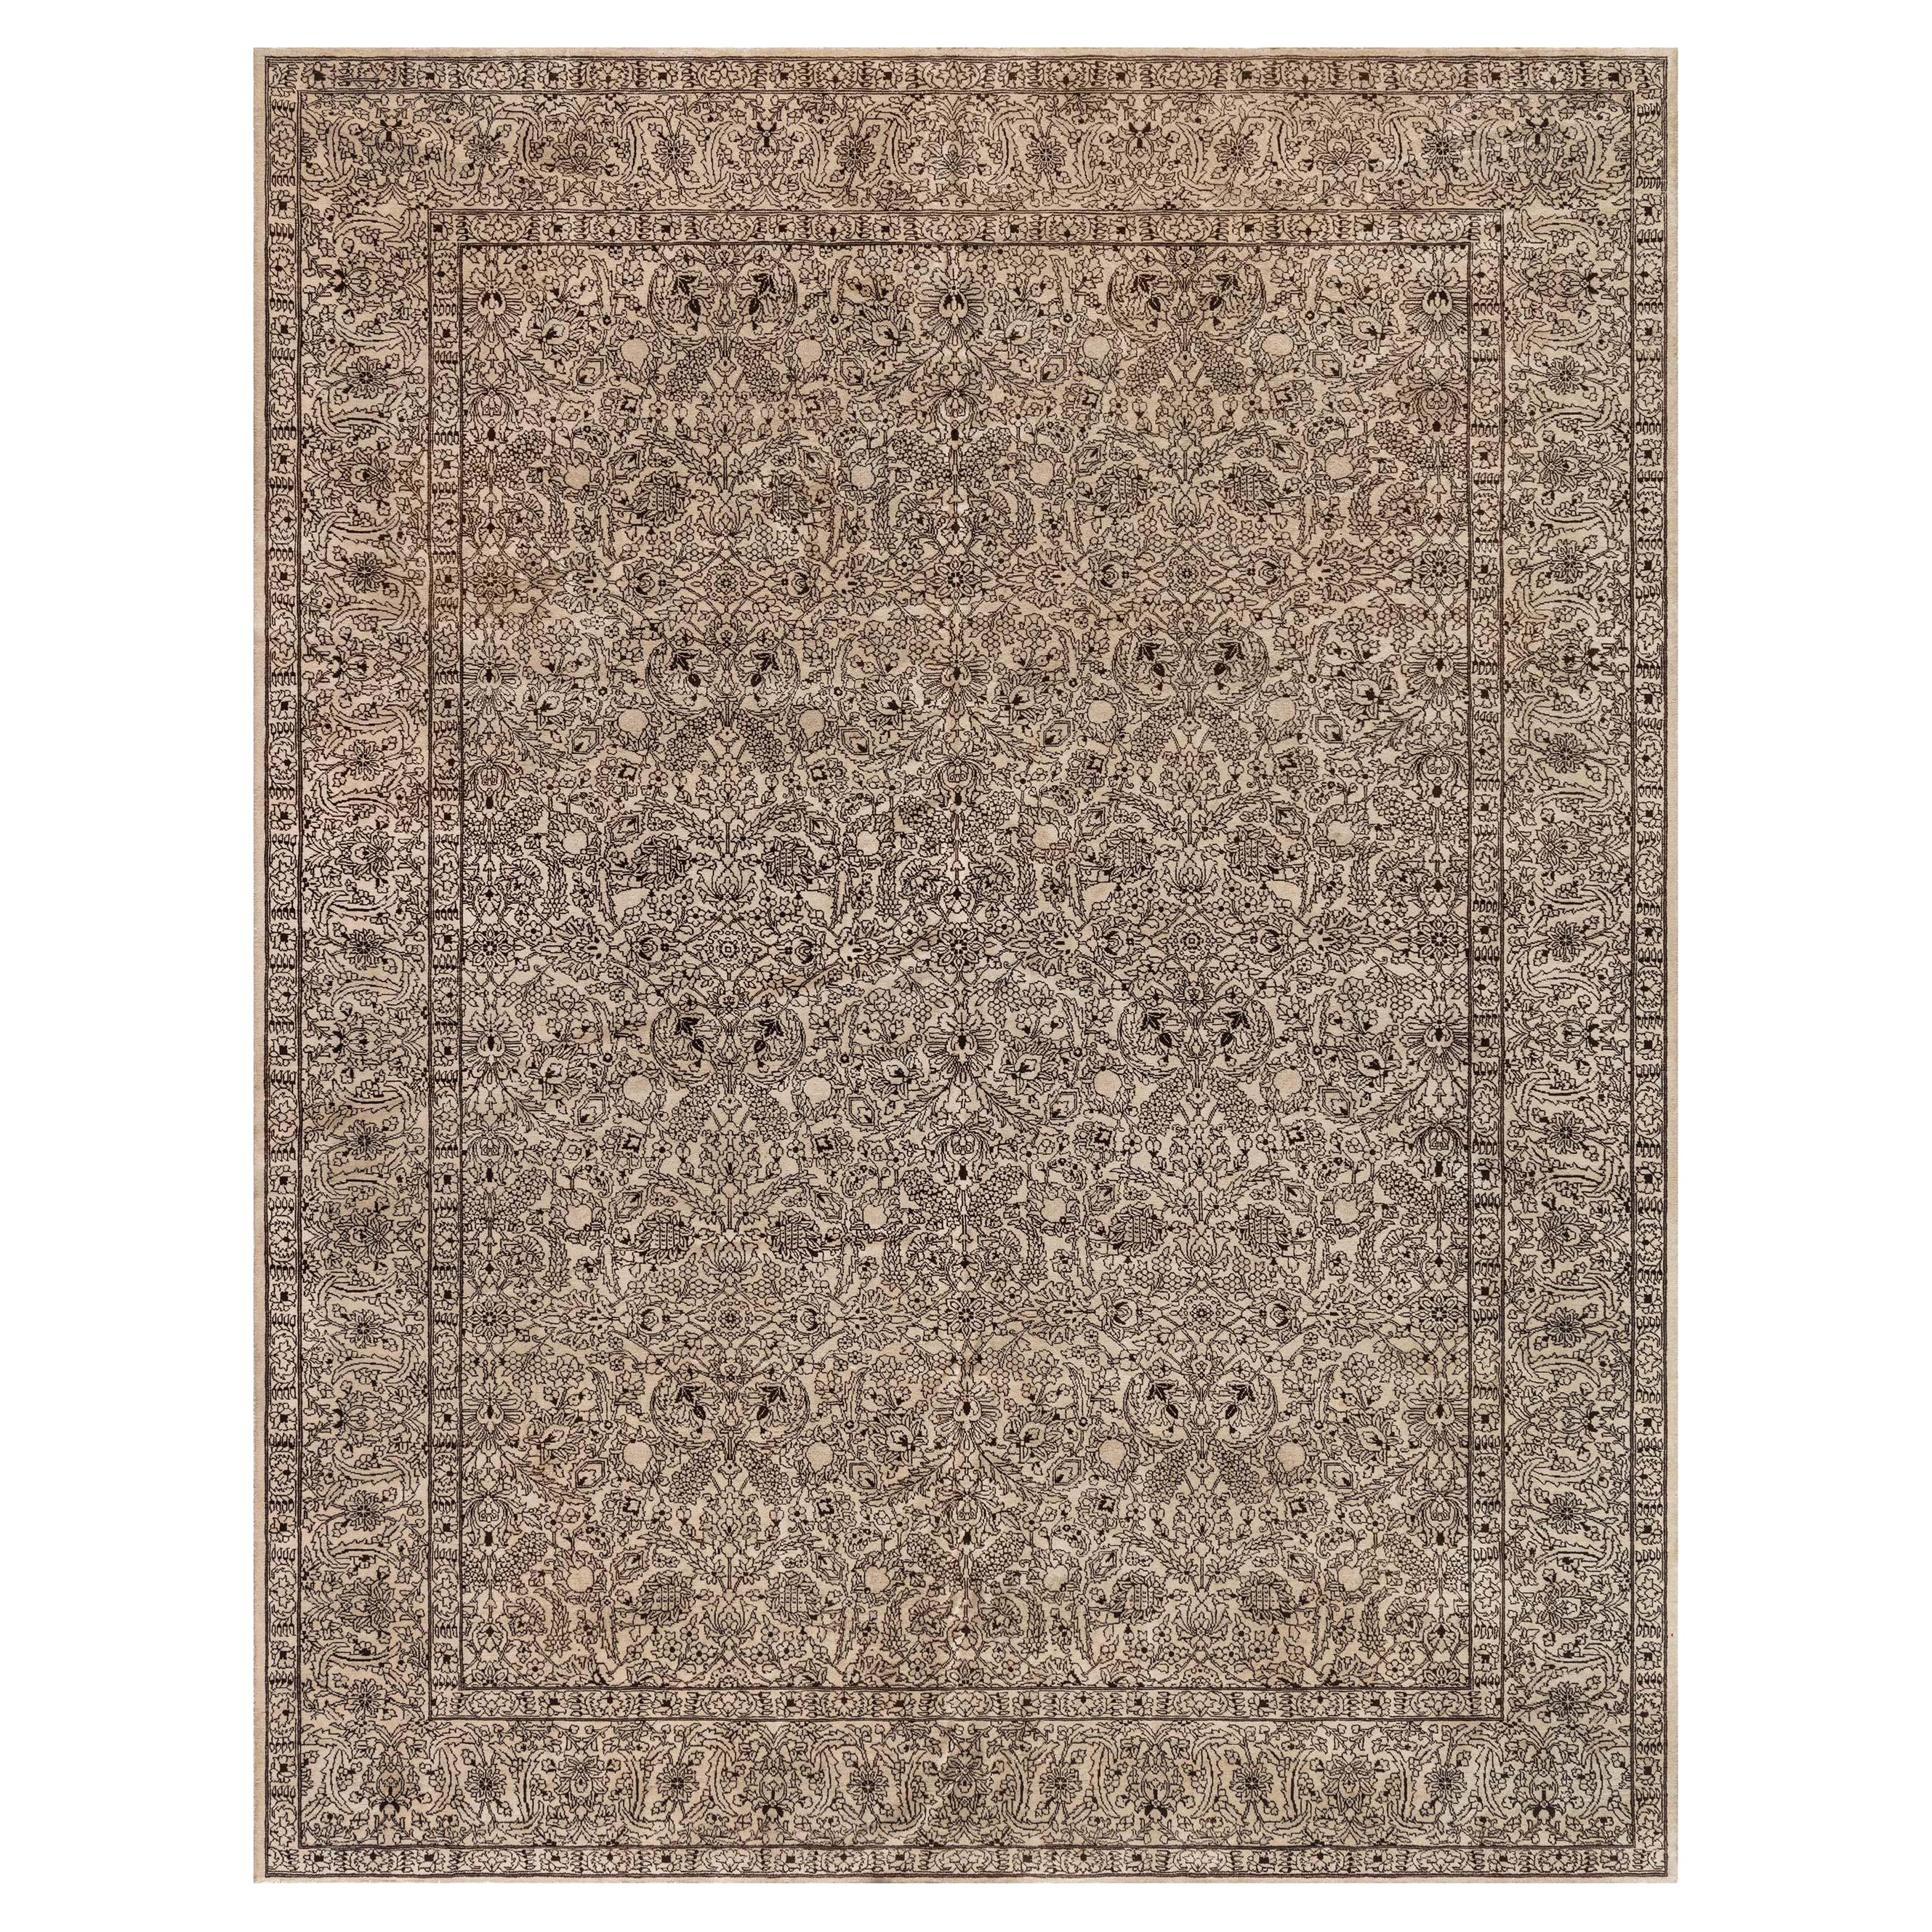 Antique Persian Tabriz Beige and Brown Rug